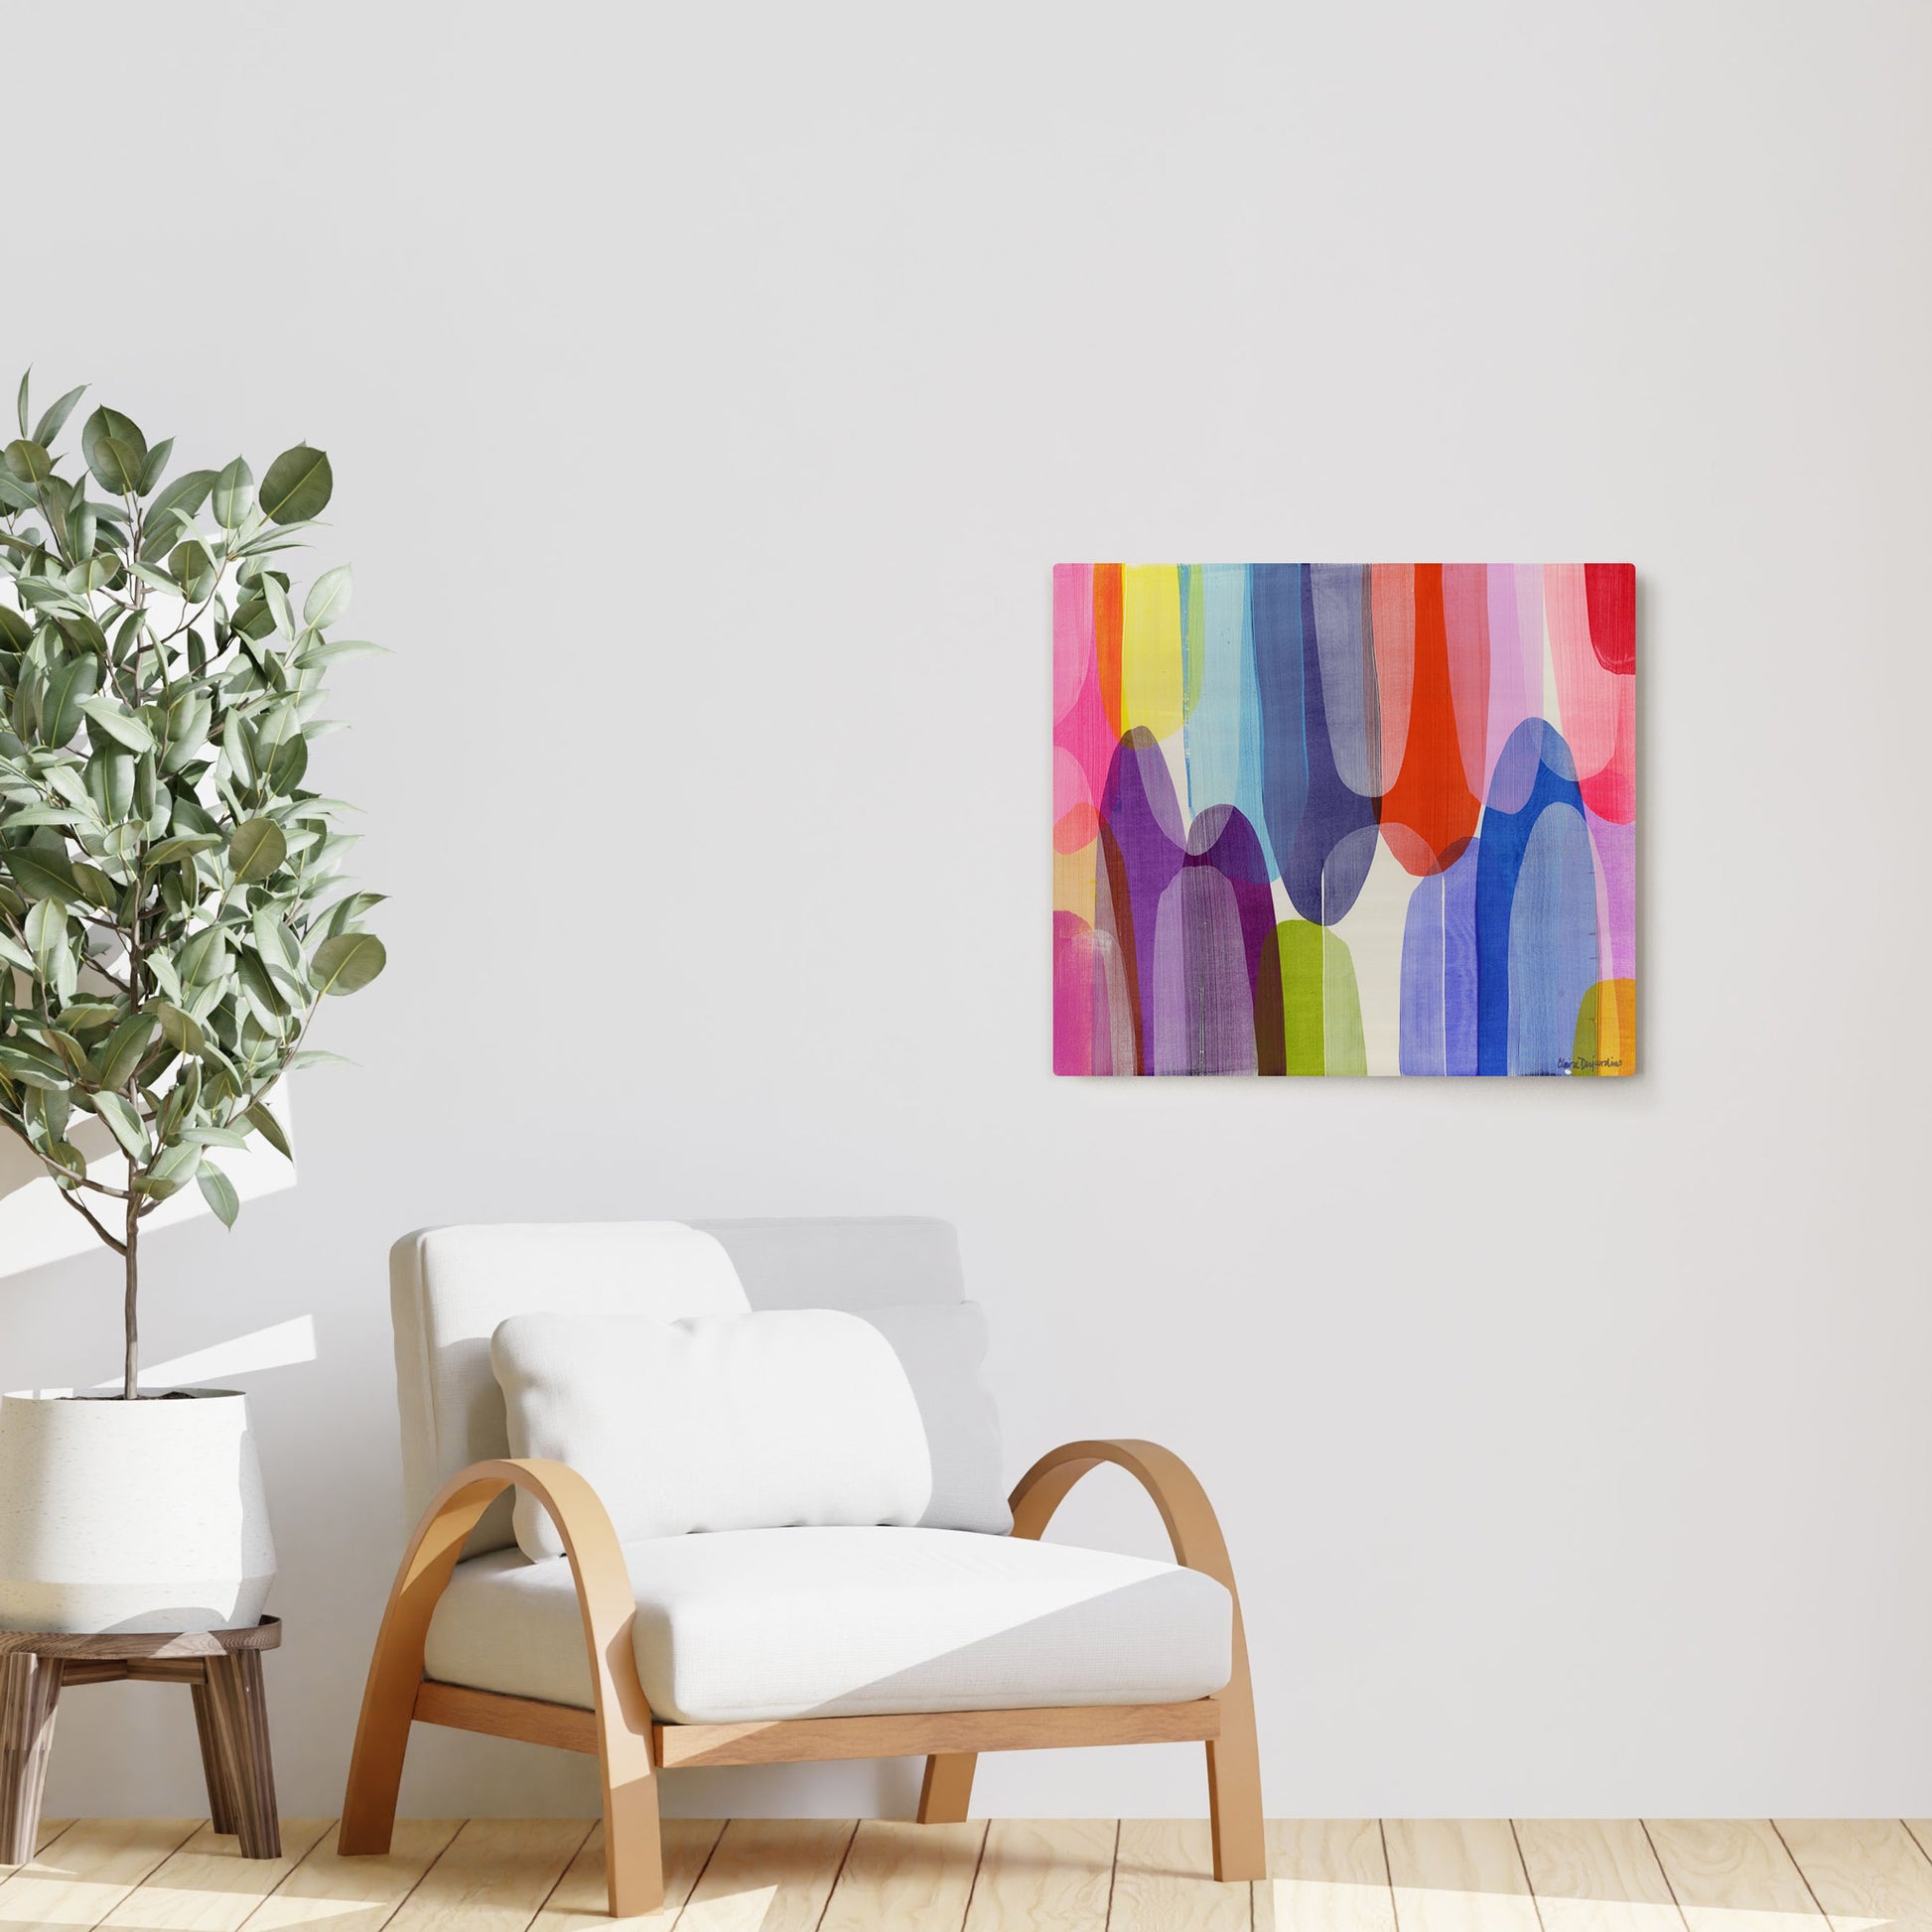 Claire Desjardins' Take Ten painting reproduced on HD metal print and displayed on wall